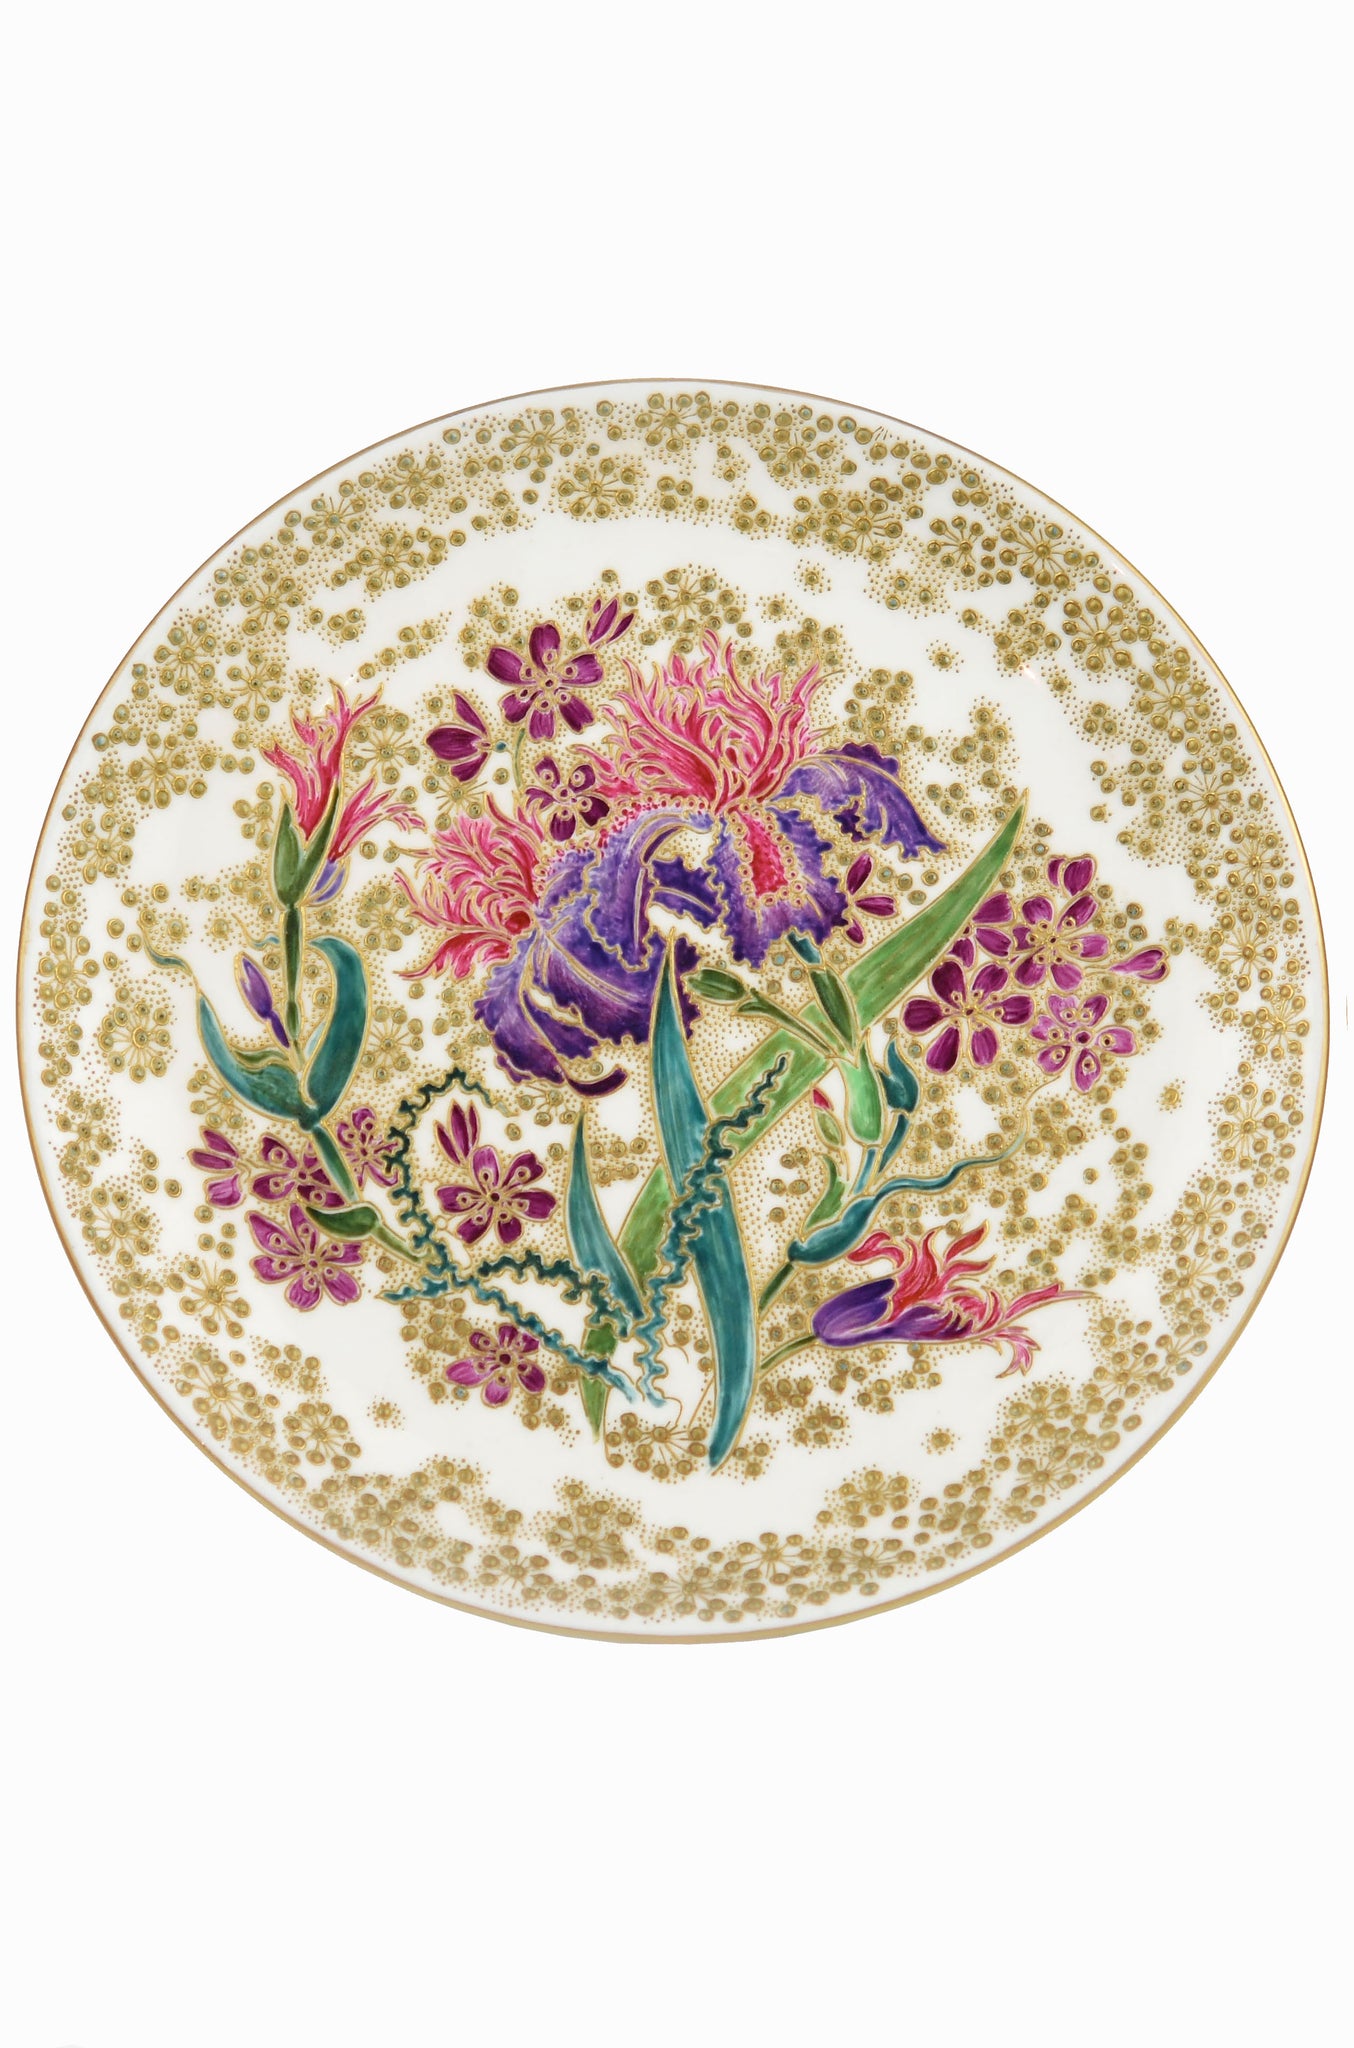 J. Callowhill & Co. Worcester, Porcelain Aesthetic Movement cabinet Plate c.1882